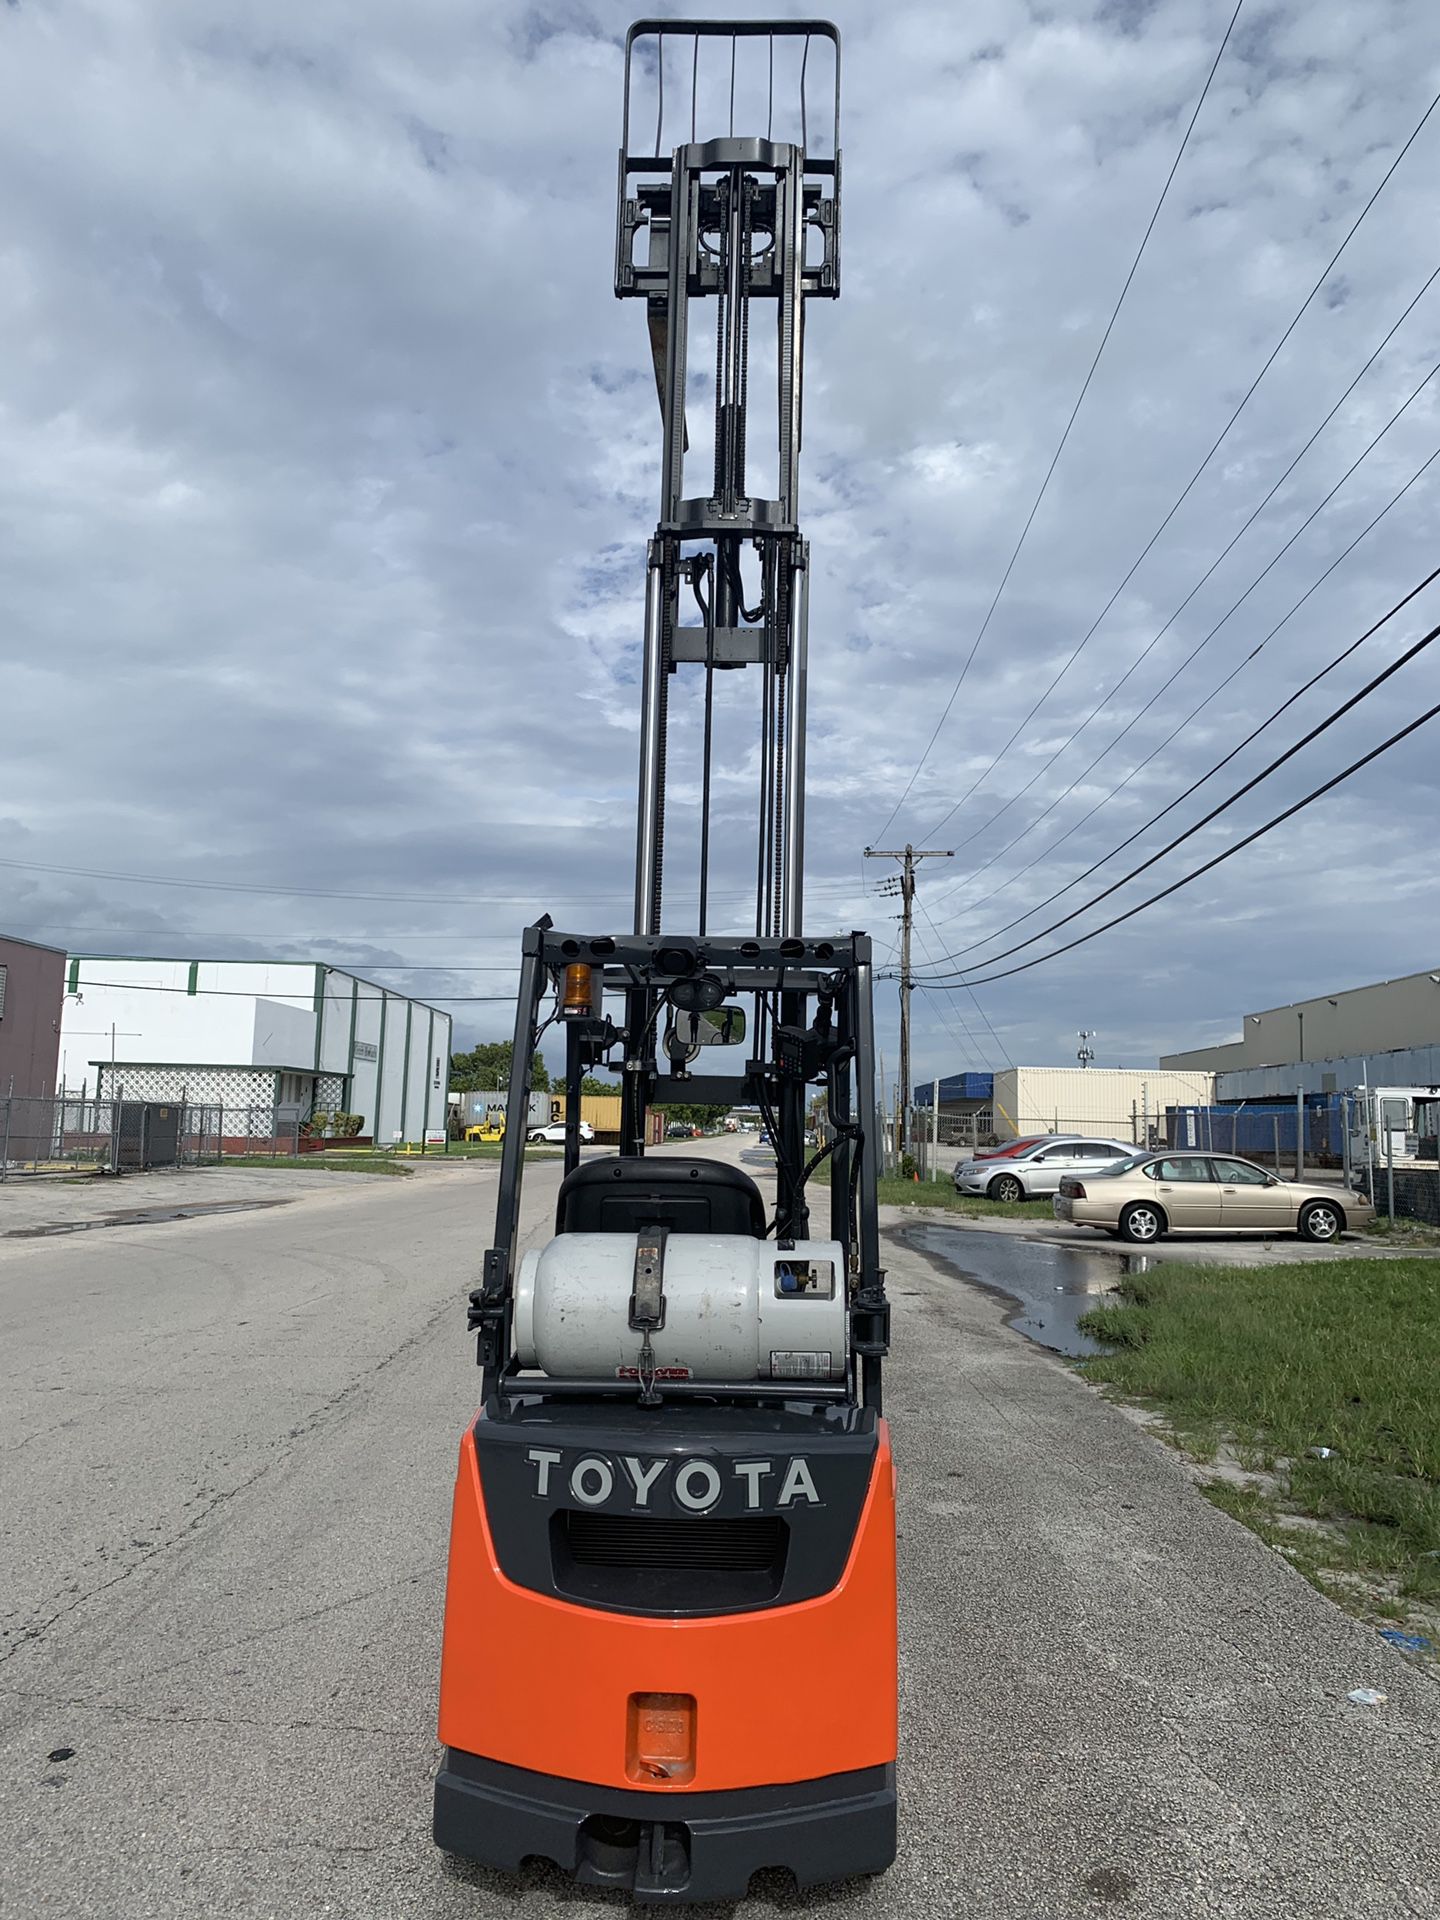 2011 Toyota forklift 4,000lb capacity three stage side shifter